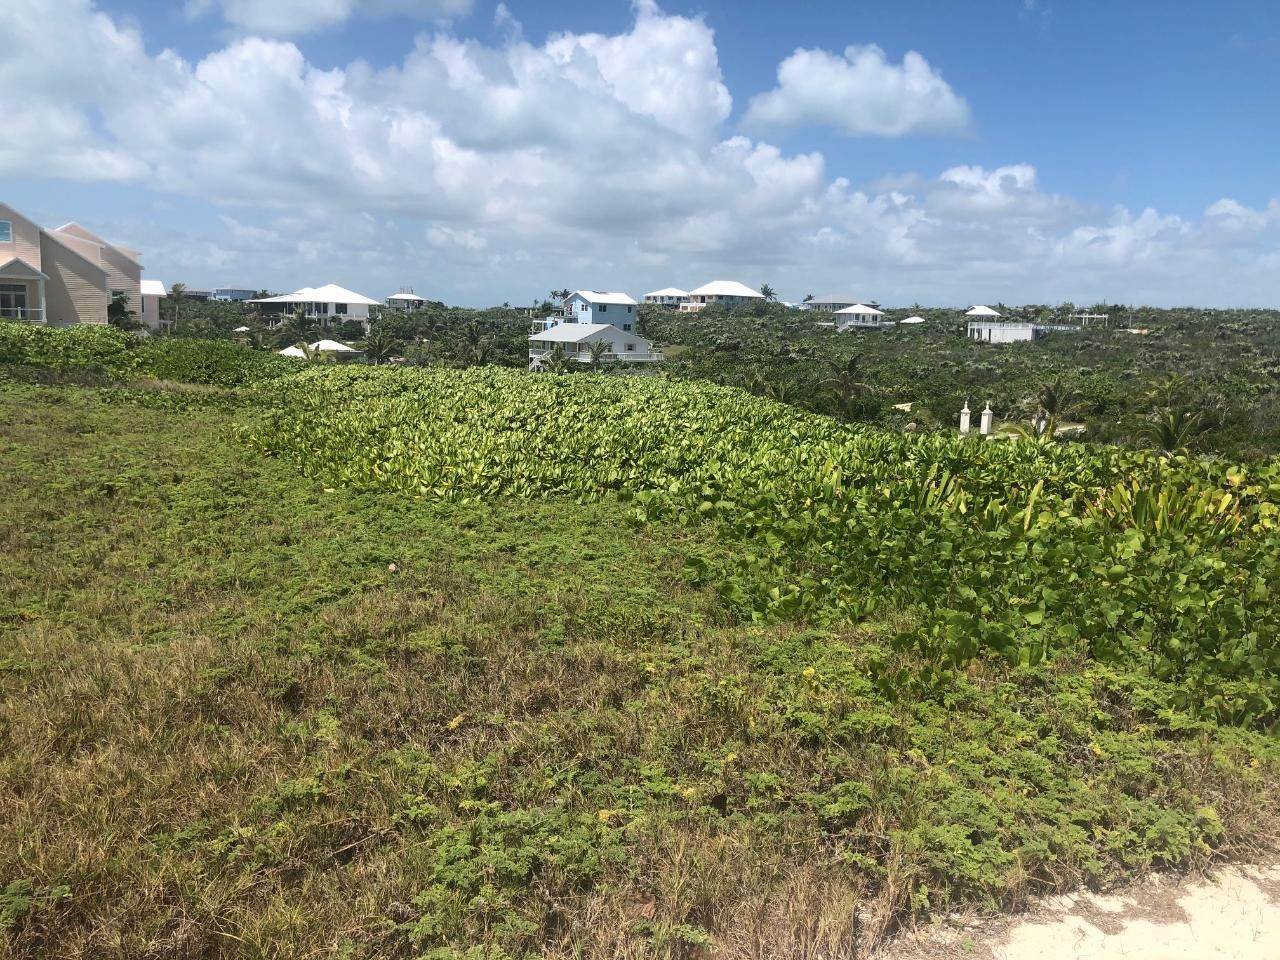 6. Lots / Acreage for Sale at Elbow Cay, Abaco, Bahamas